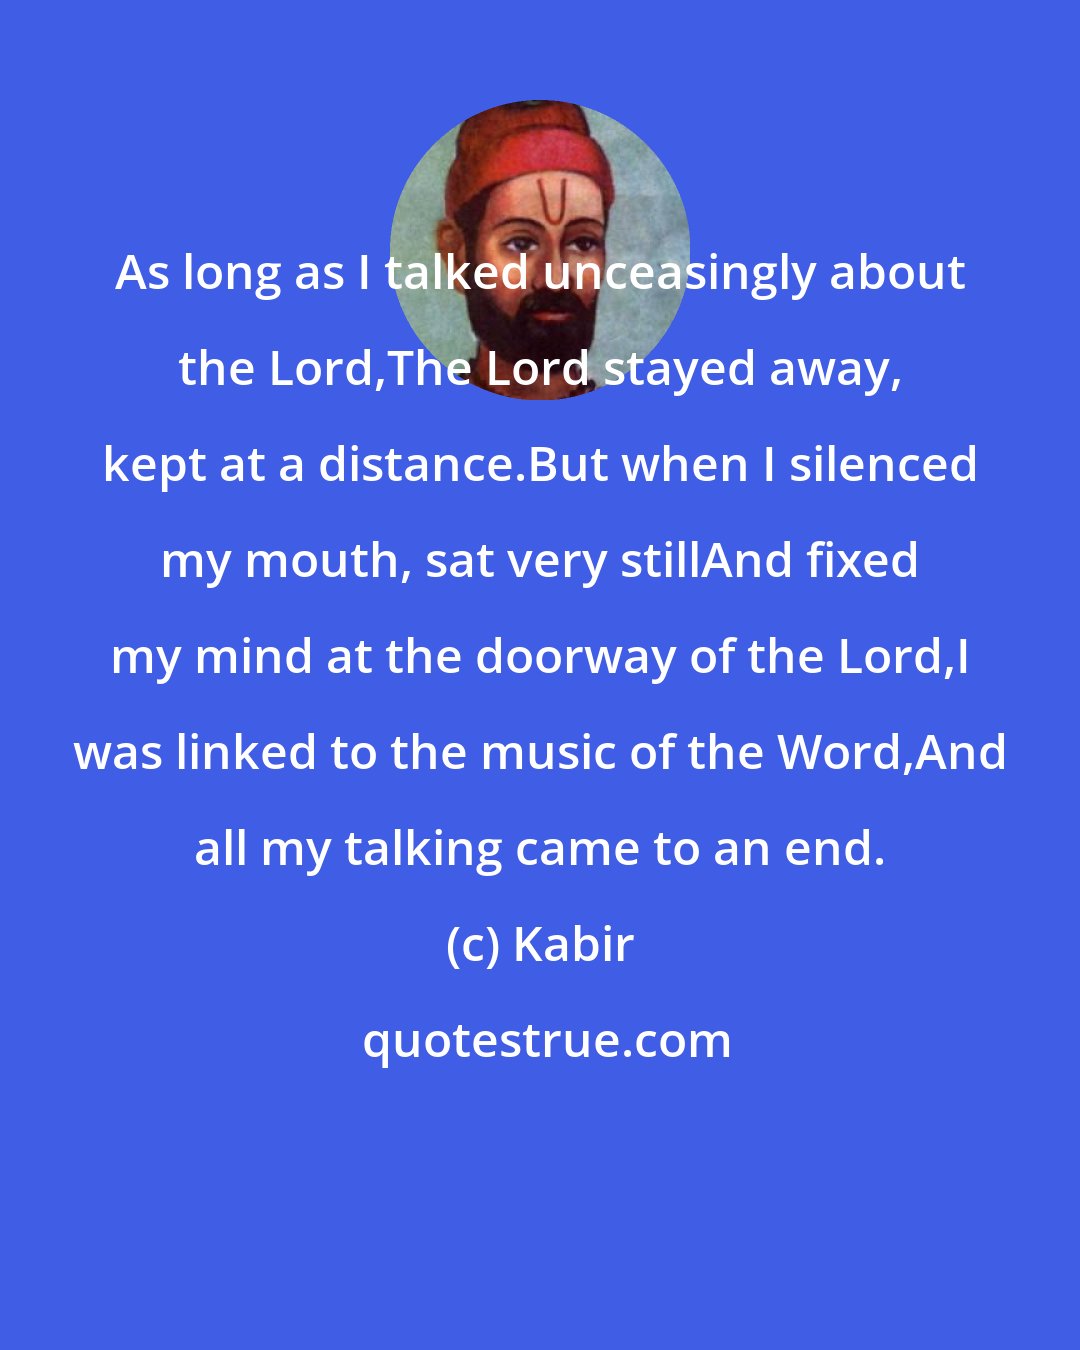 Kabir: As long as I talked unceasingly about the Lord,The Lord stayed away, kept at a distance.But when I silenced my mouth, sat very stillAnd fixed my mind at the doorway of the Lord,I was linked to the music of the Word,And all my talking came to an end.